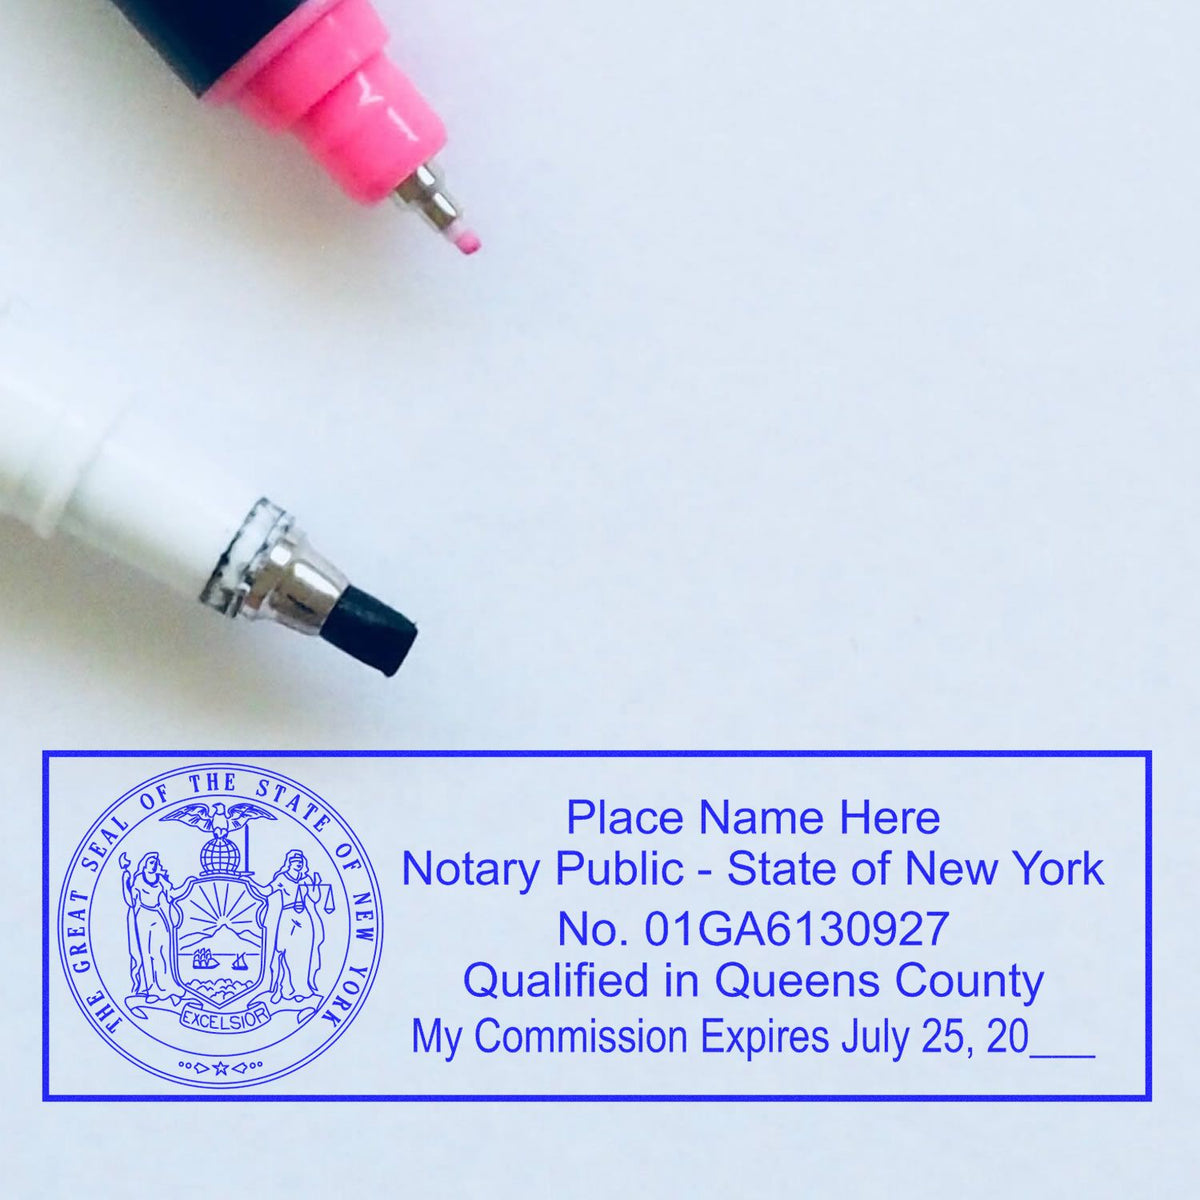 A lifestyle photo showing a stamped image of the Wooden Handle New York State Seal Notary Public Stamp on a piece of paper